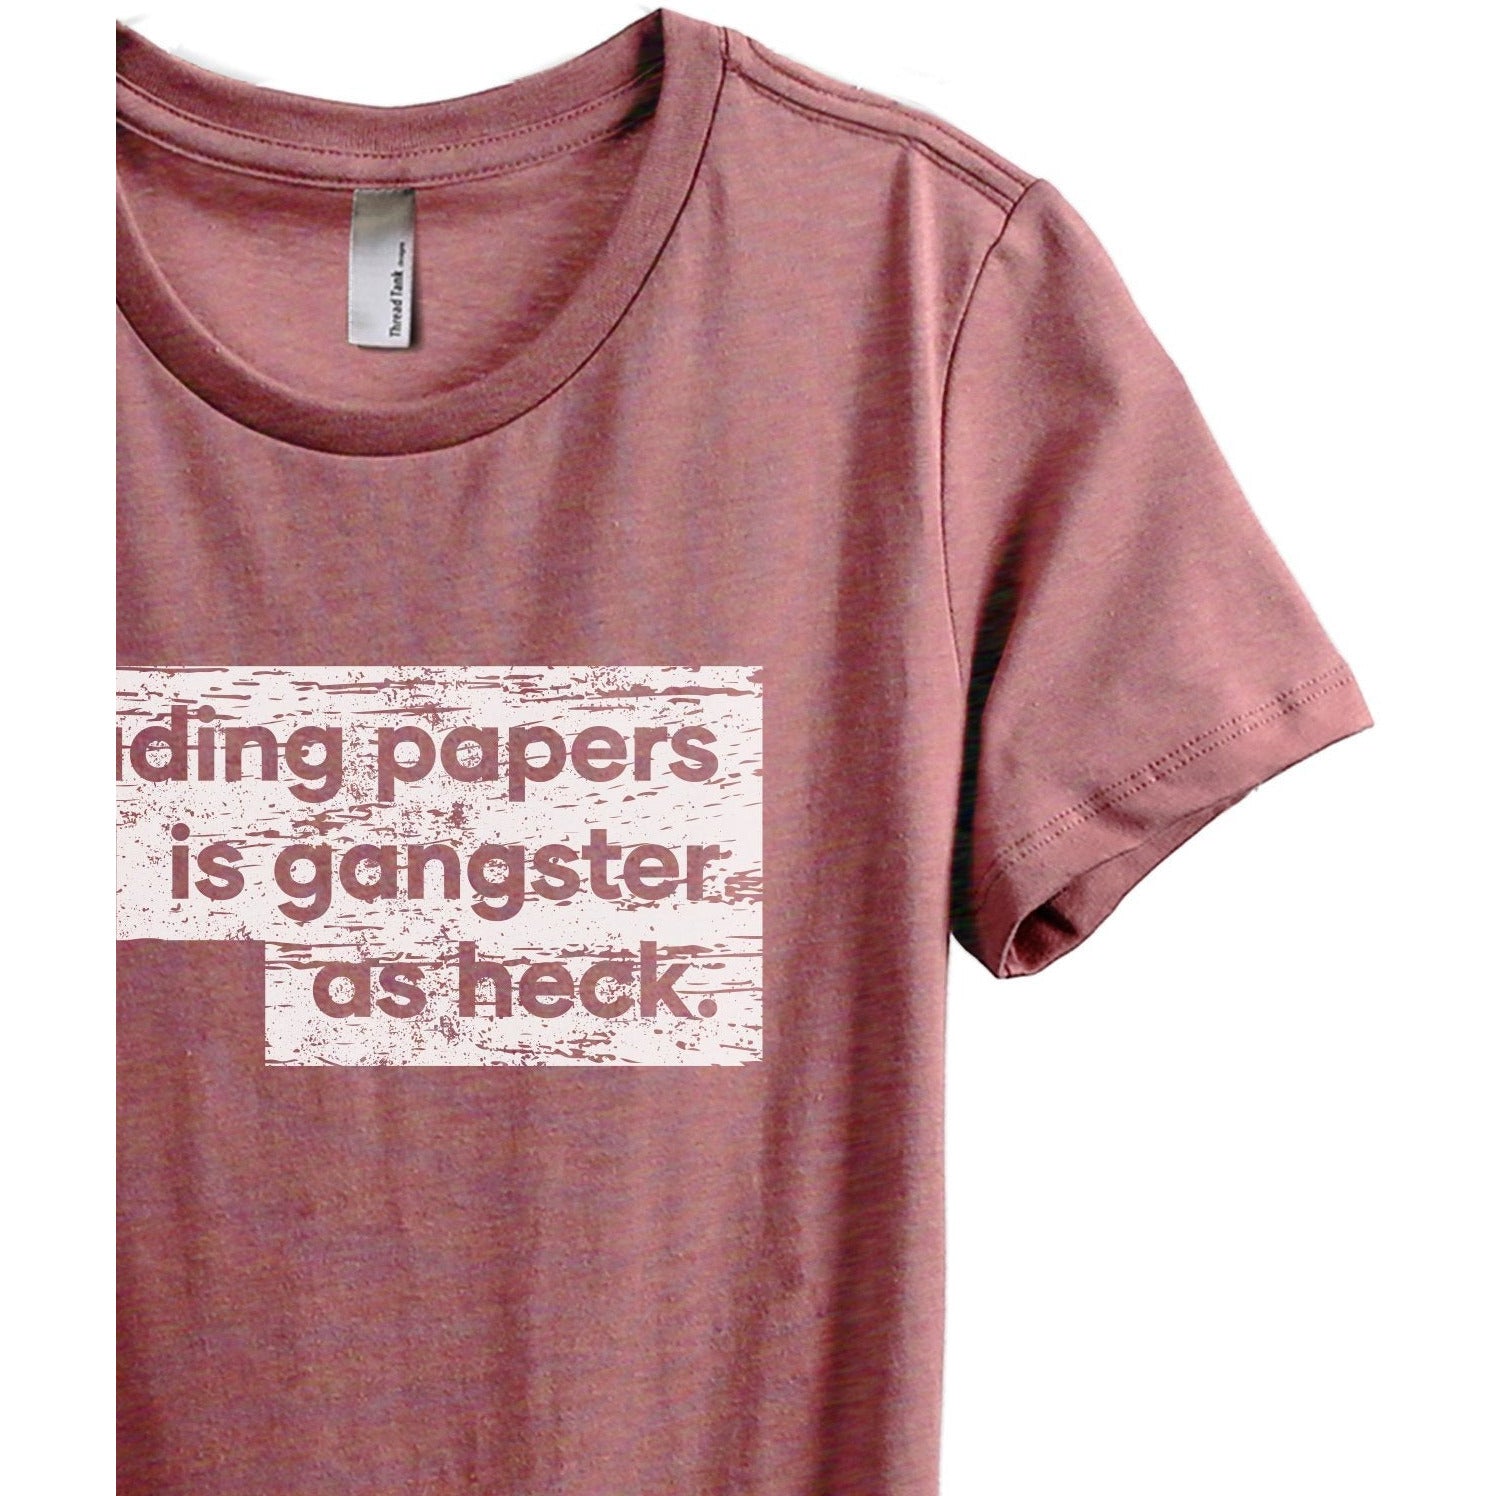 Grading Papers Is Gangster As Heck Women's Relaxed Crewneck T-Shirt Top Tee Heather Rouge Zoom Details
